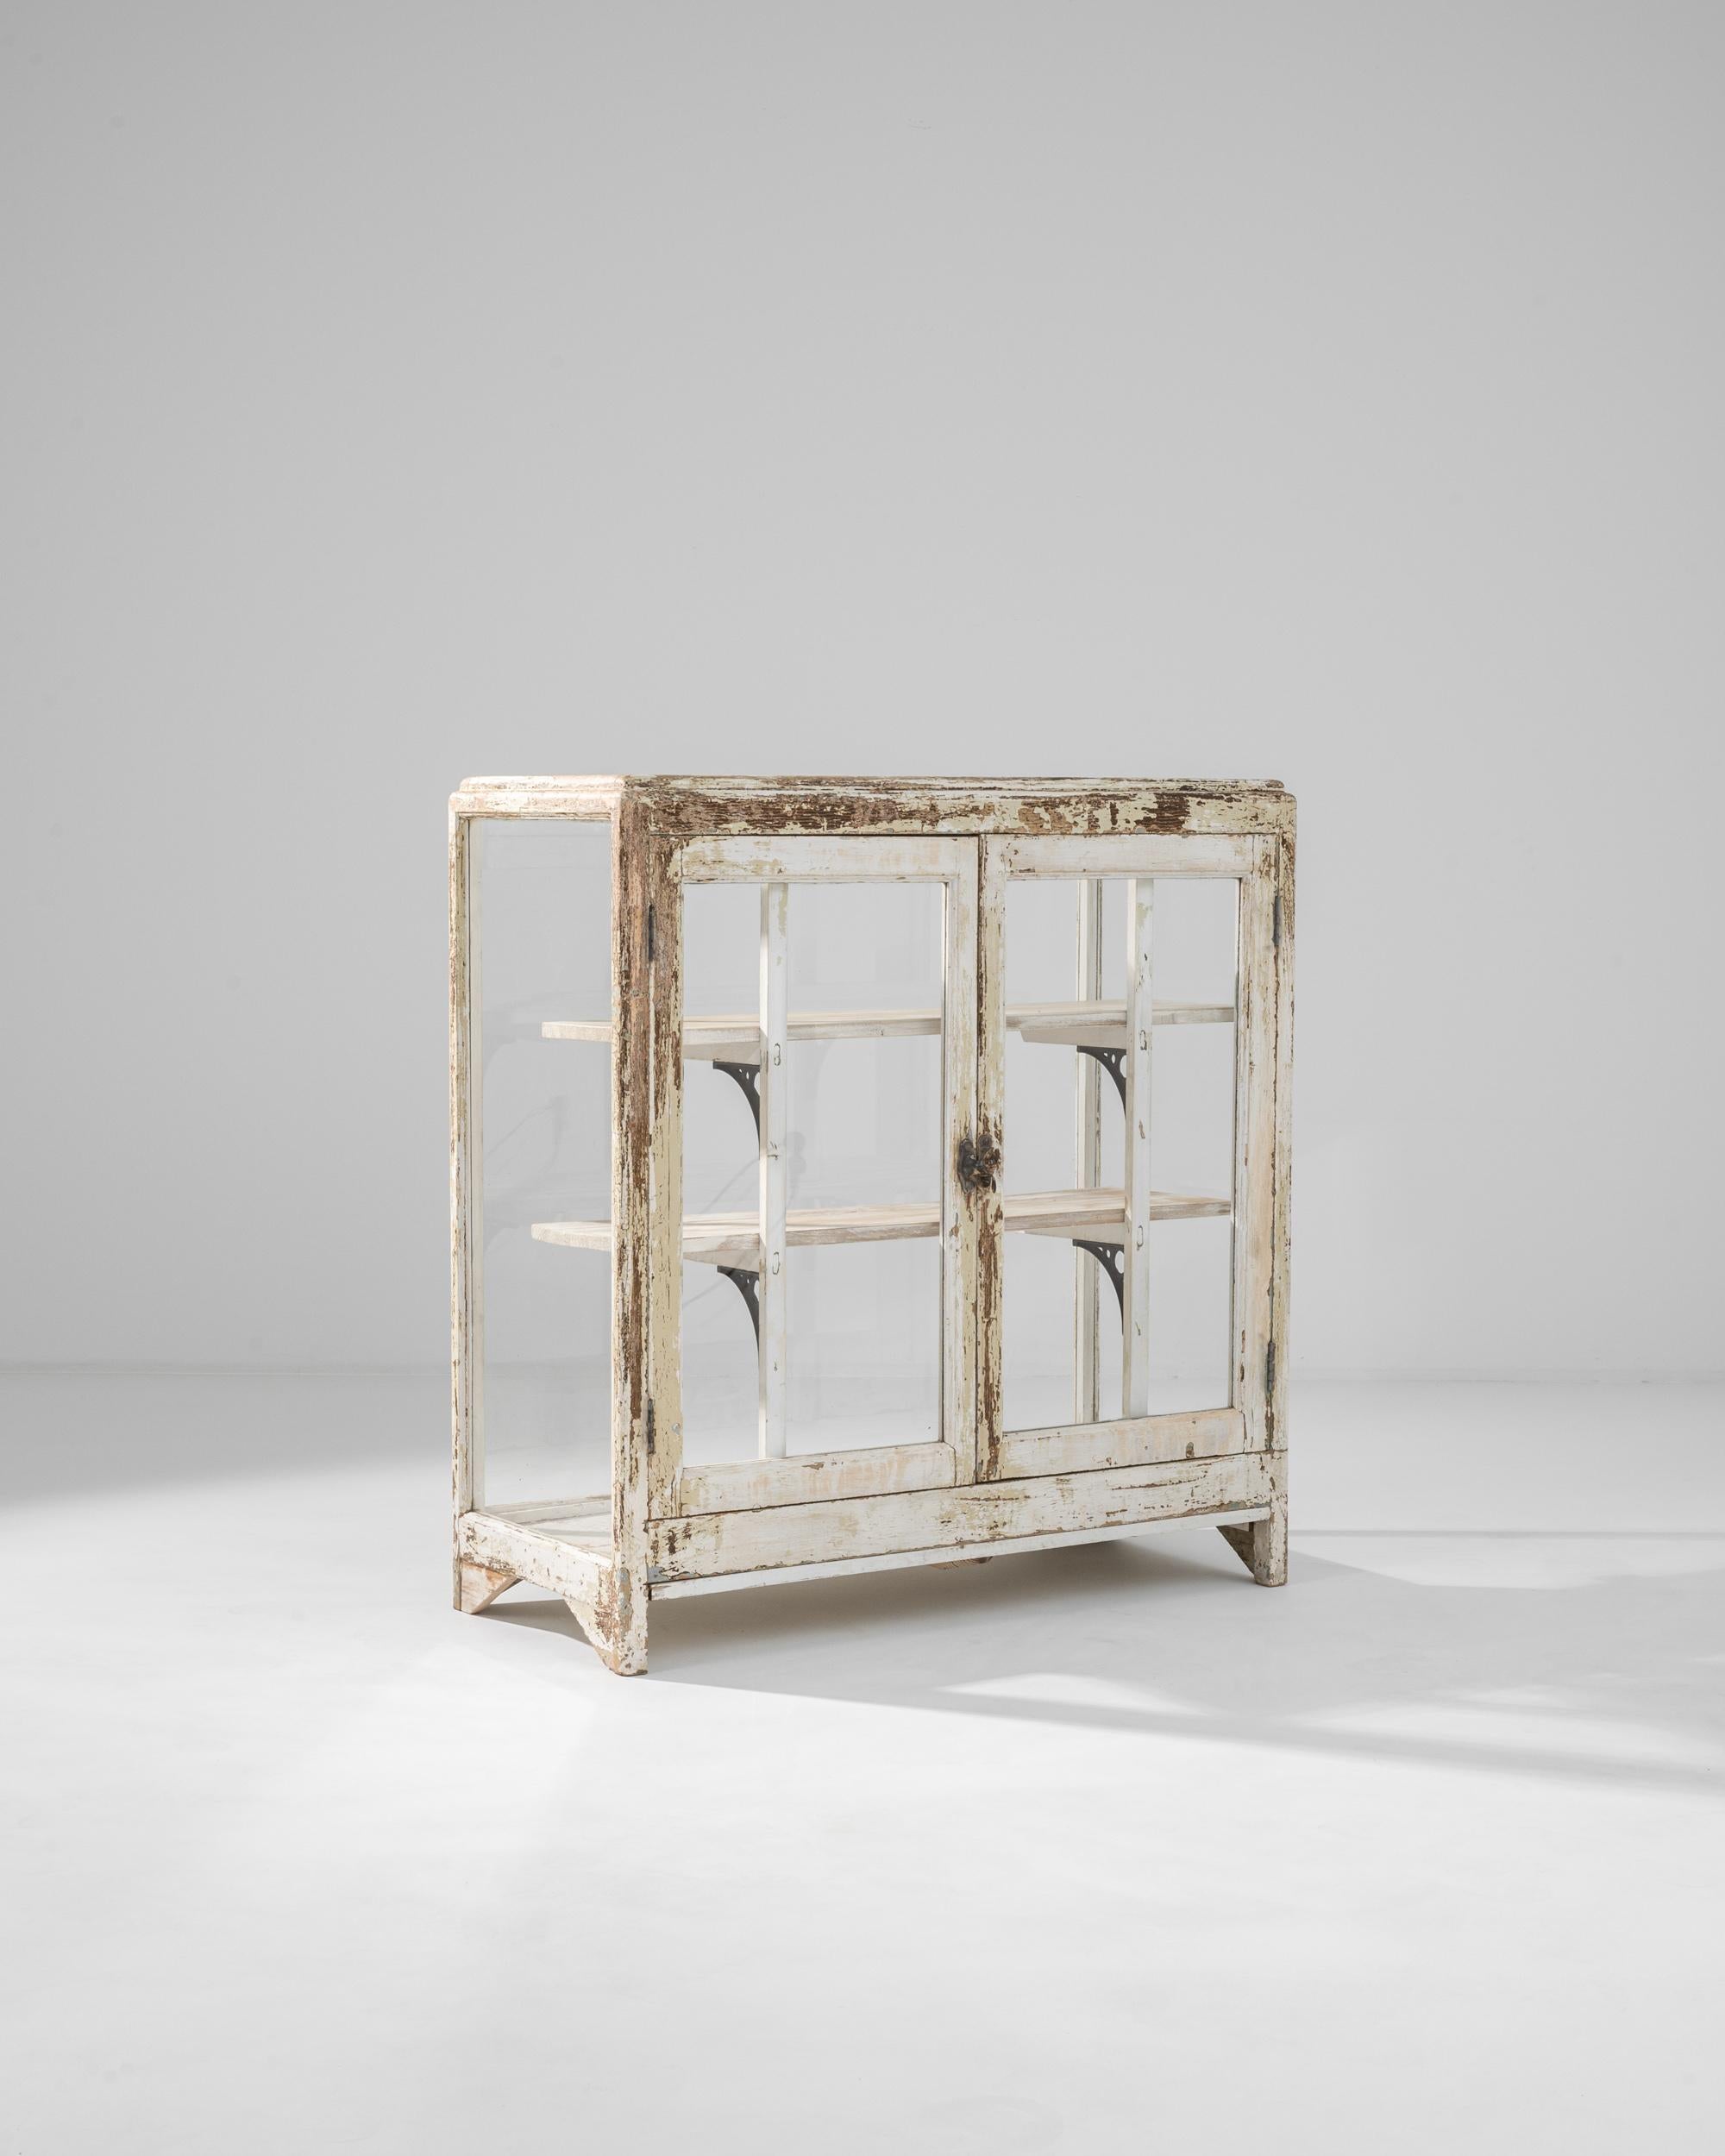 A distinctive patina gives this vintage vitrine a romantic air of nostalgia. Made in France in the 20th century, glass windows on all four sides of the case maximize natural light, illuminating the objects placed on the wooden shelves within. The